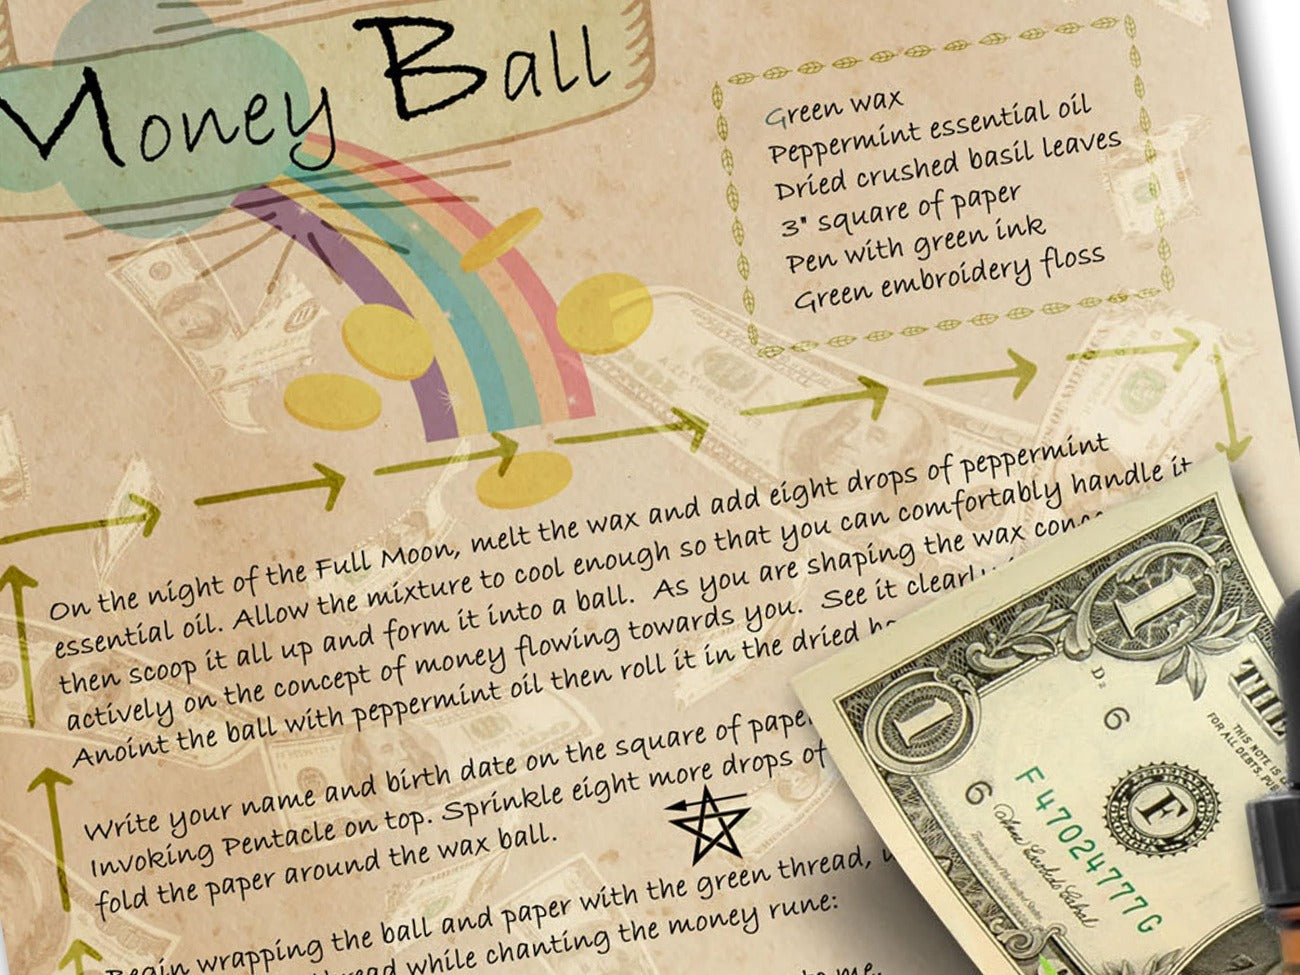 MONEY BALL a Spell of Riches, Melted Wax Spell for Prosperity, Wicca Candle Magic